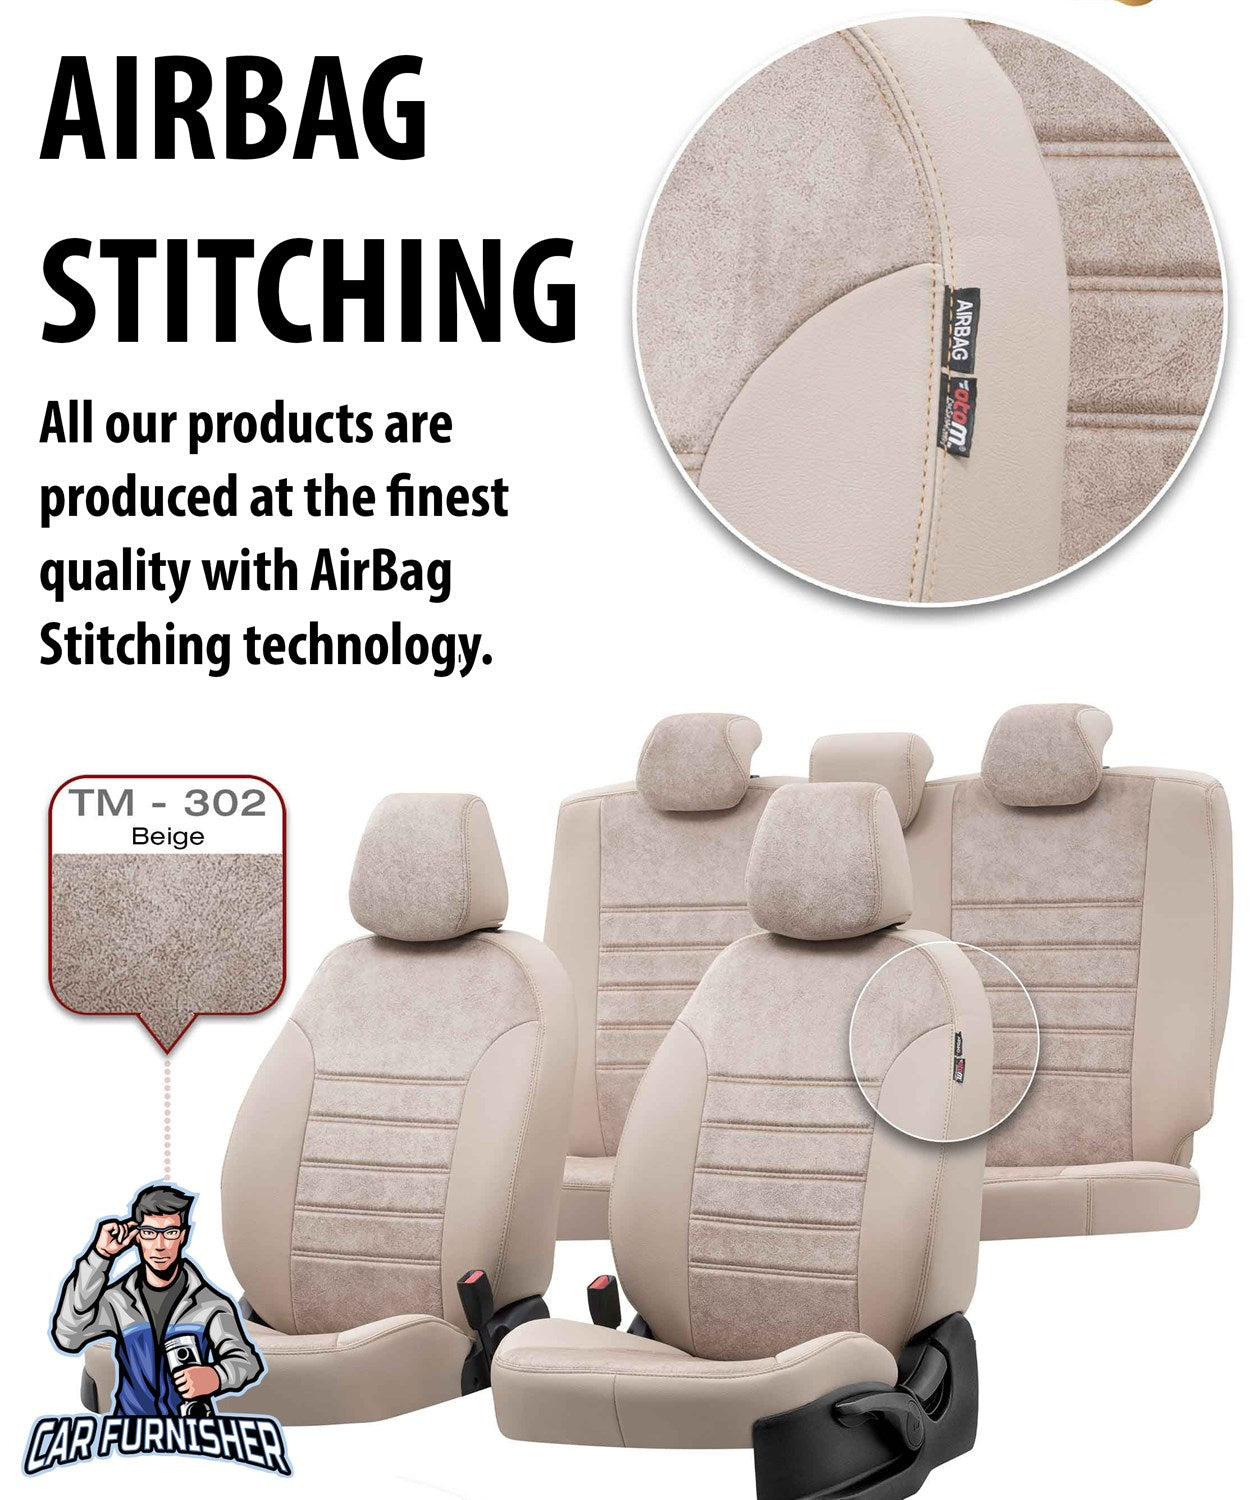 Renault Kangoo Seat Covers Milano Suede Design Smoked Black Leather & Suede Fabric